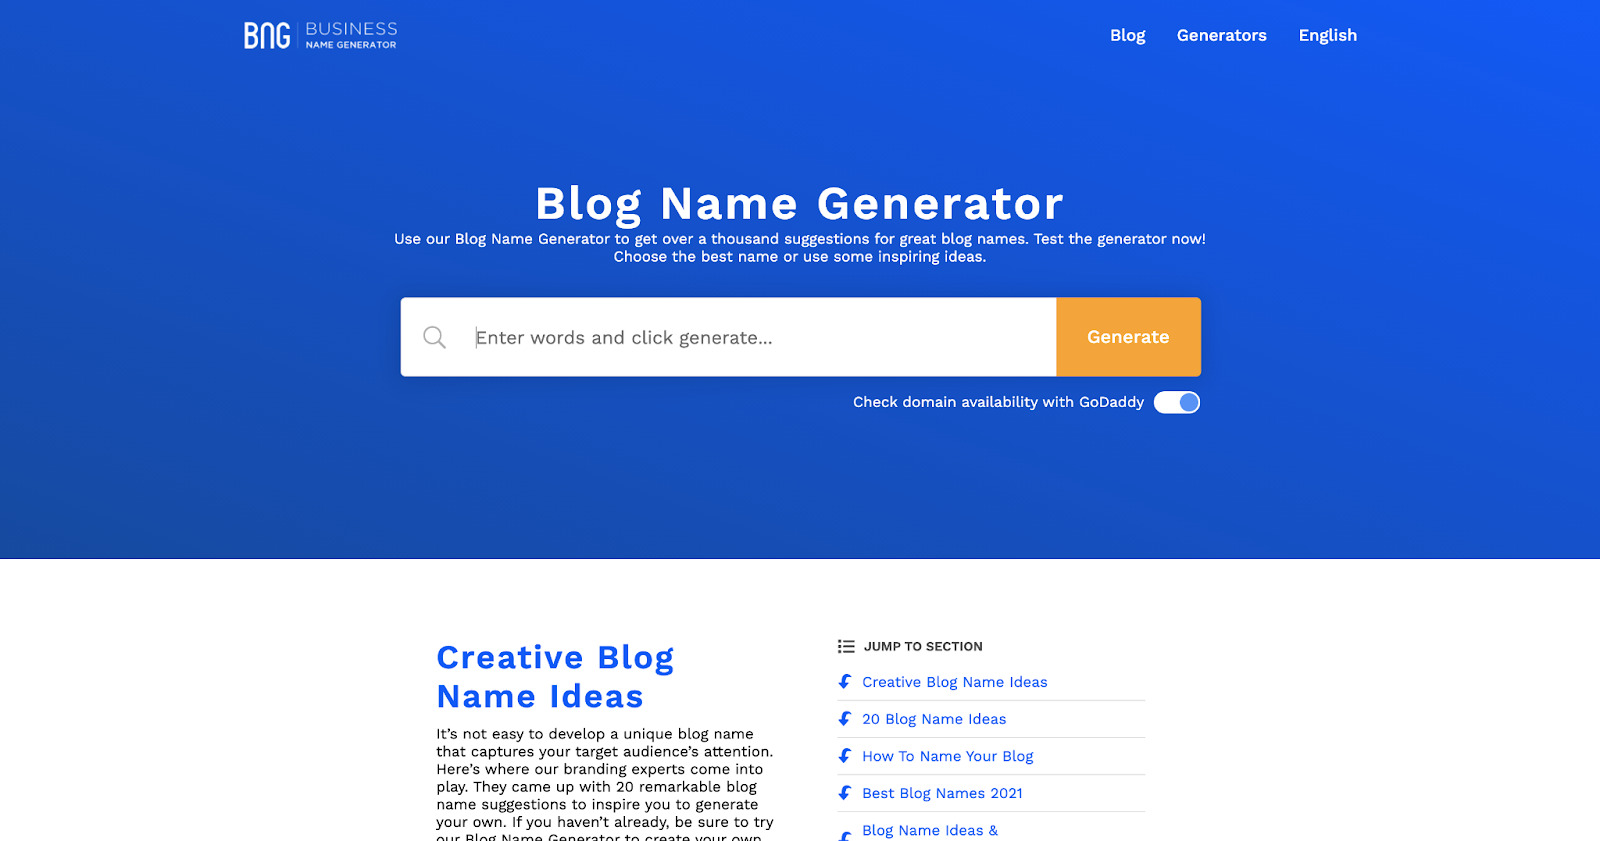 BNG is a simple tool to create hundreds of blog names